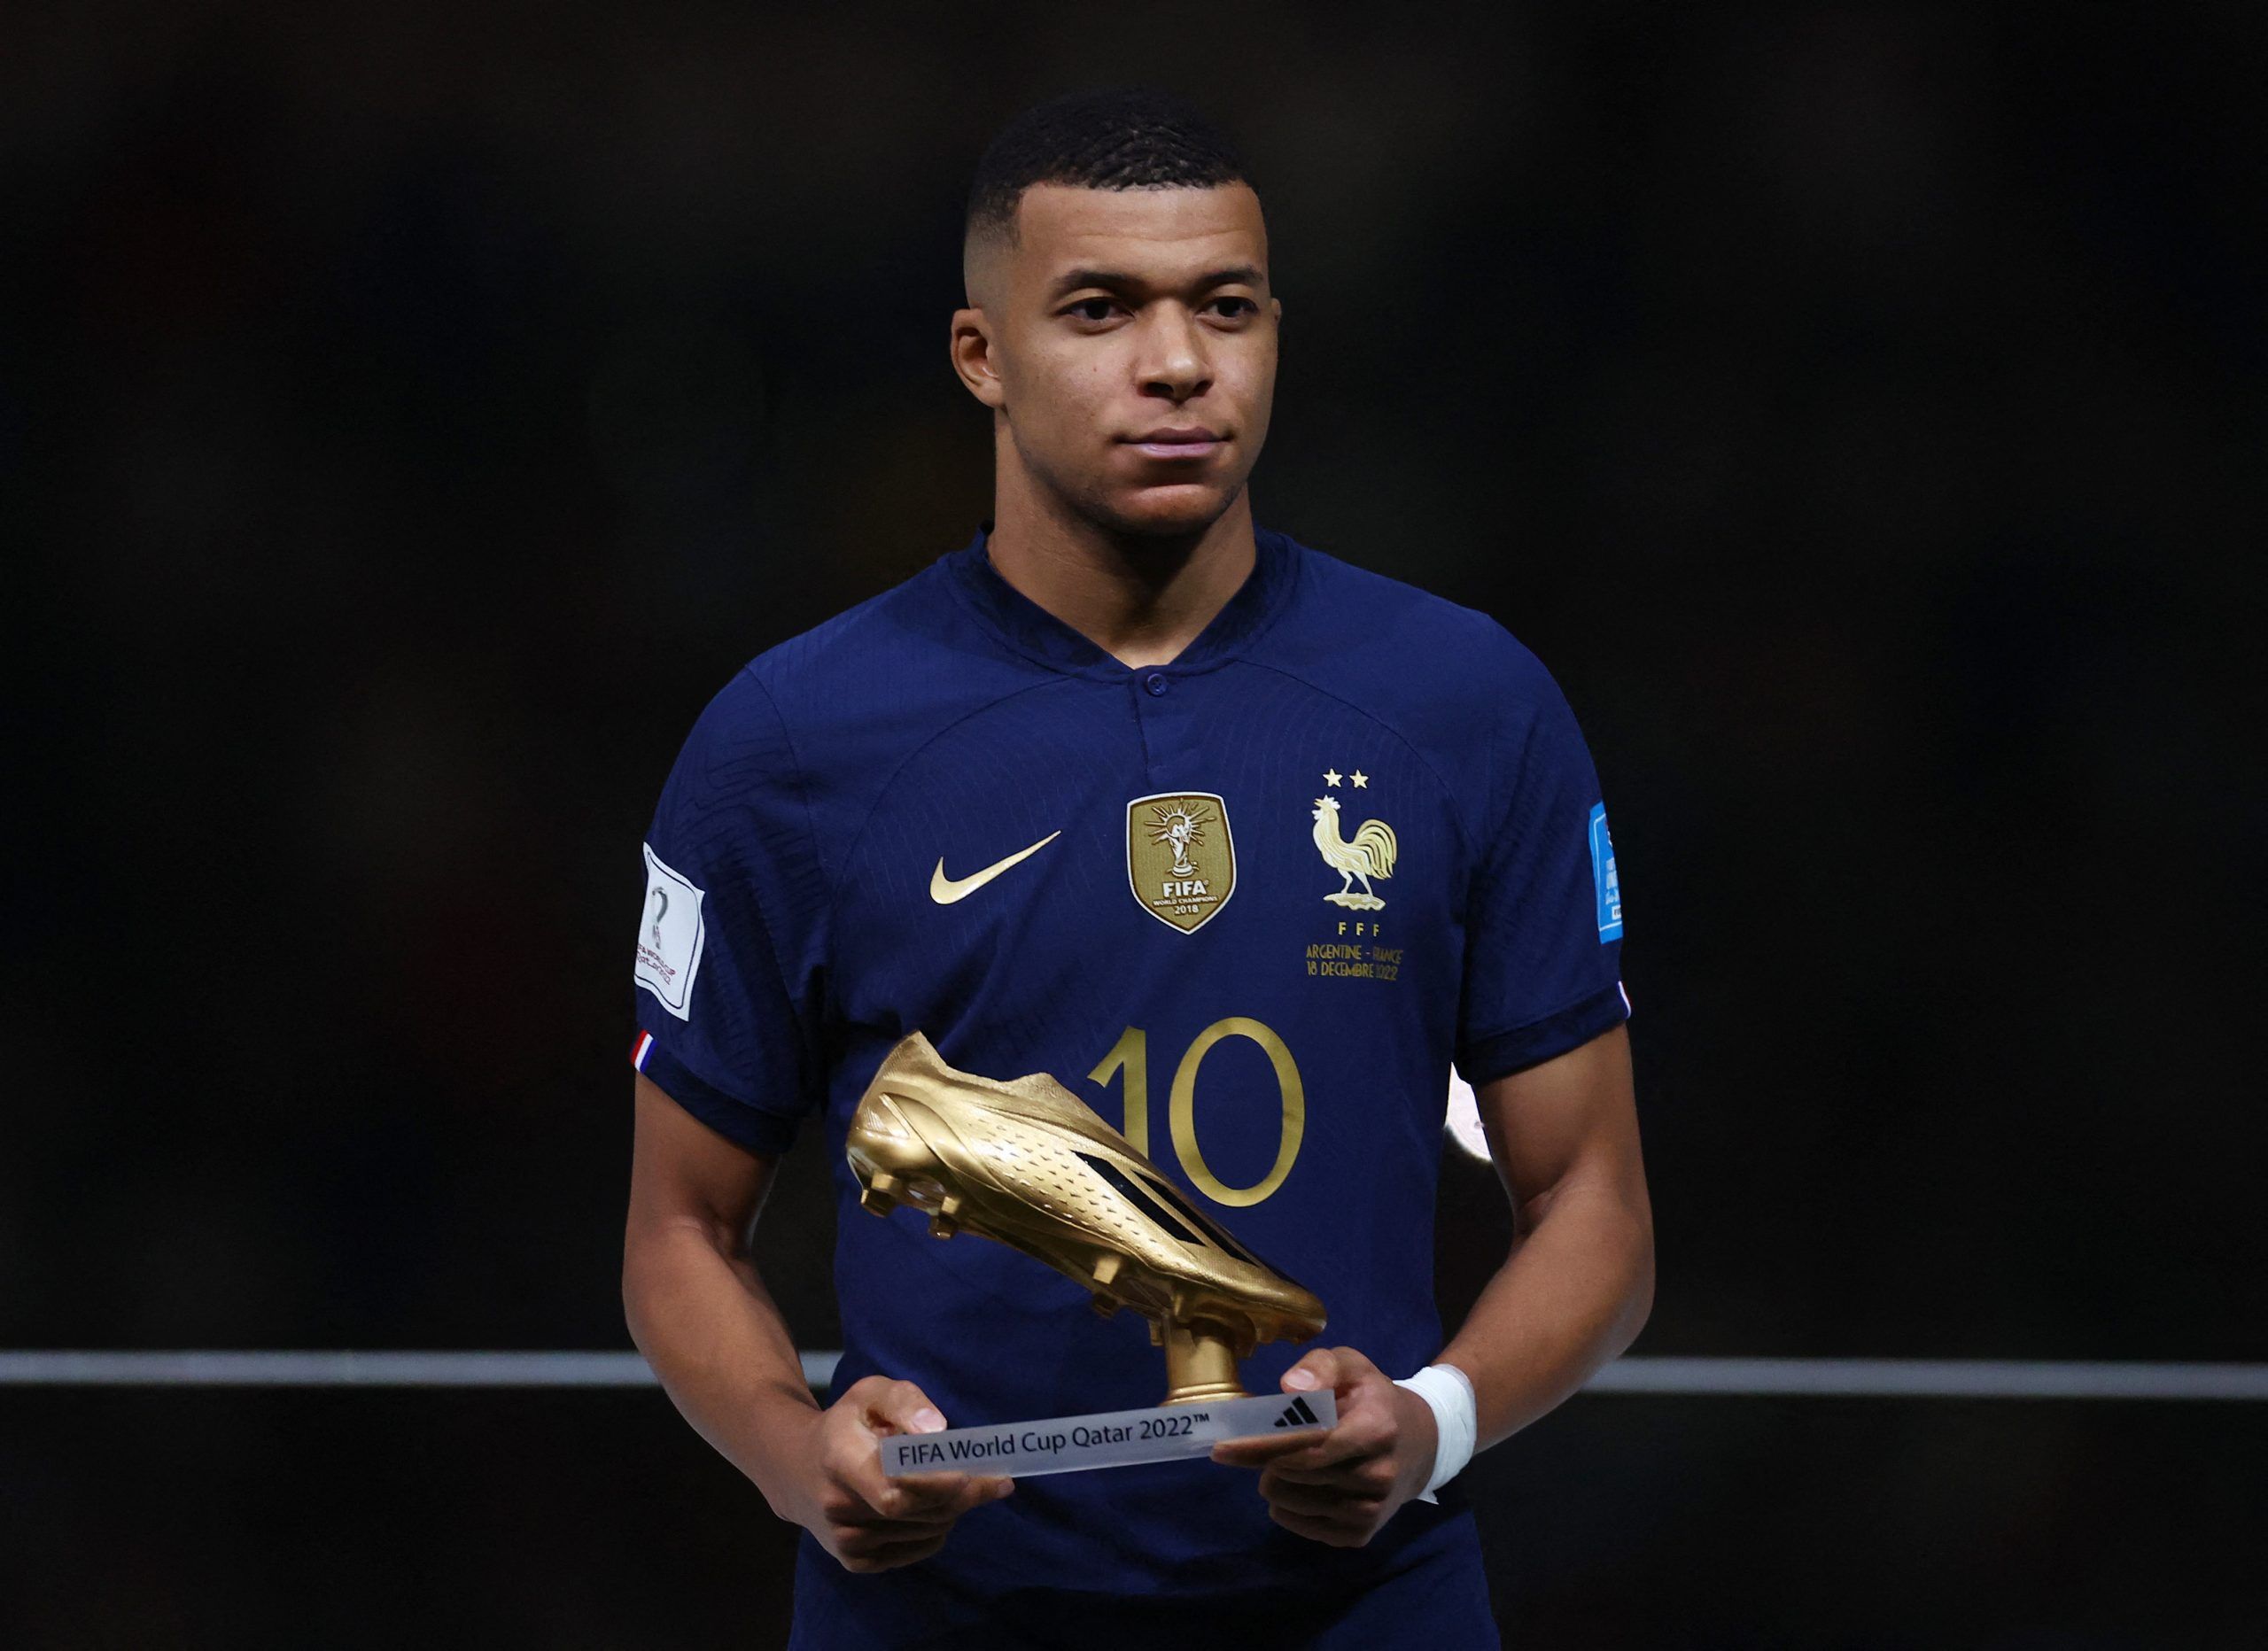 Soccer Football - FIFA World Cup Qatar 2022 - Final - Argentina v France - Lusail Stadium, Lusail, Qatar - December 18, 2022 France's Kylian Mbappe poses with his Golden Boot award during the award ceremony after the match REUTERS/Kai Pfaffenbach